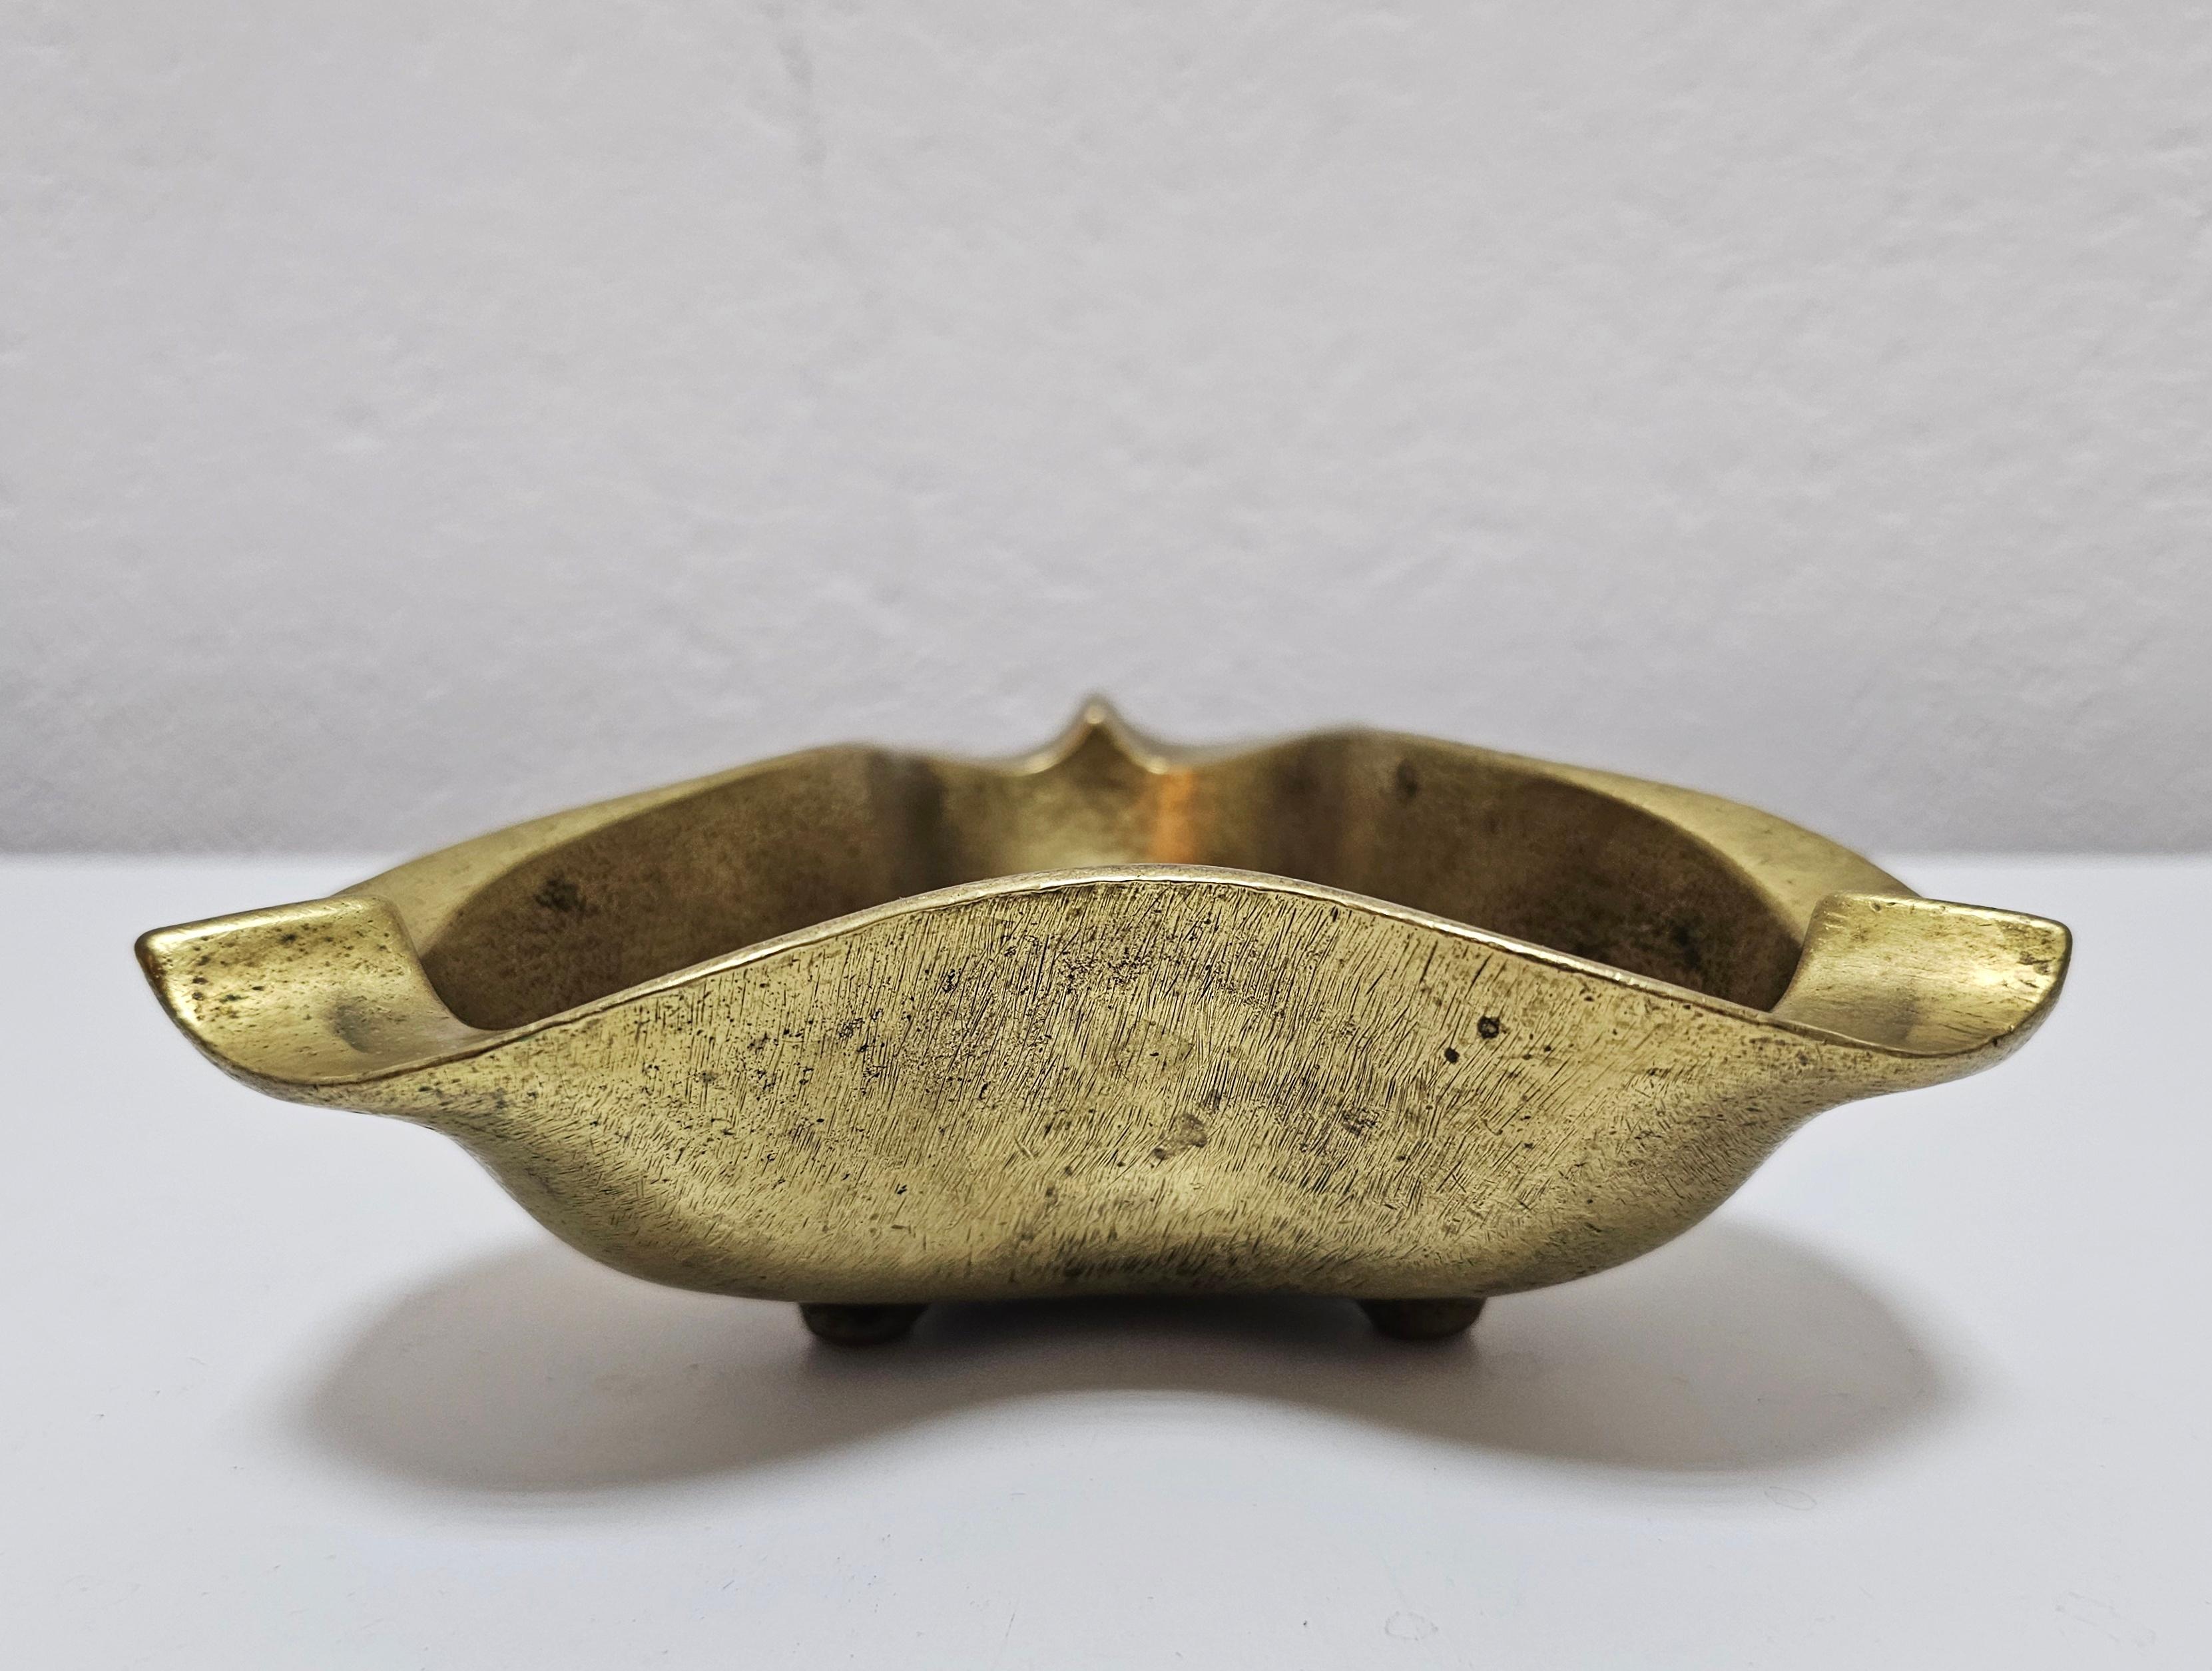 In this listing you will find an extremely rare and absolutely extraordinary sculptural Brutalist ashtray for cigars done in bronze. It was designed by Austrian designer Heinz Goll, who's work is often found at auctions in some of the biggest